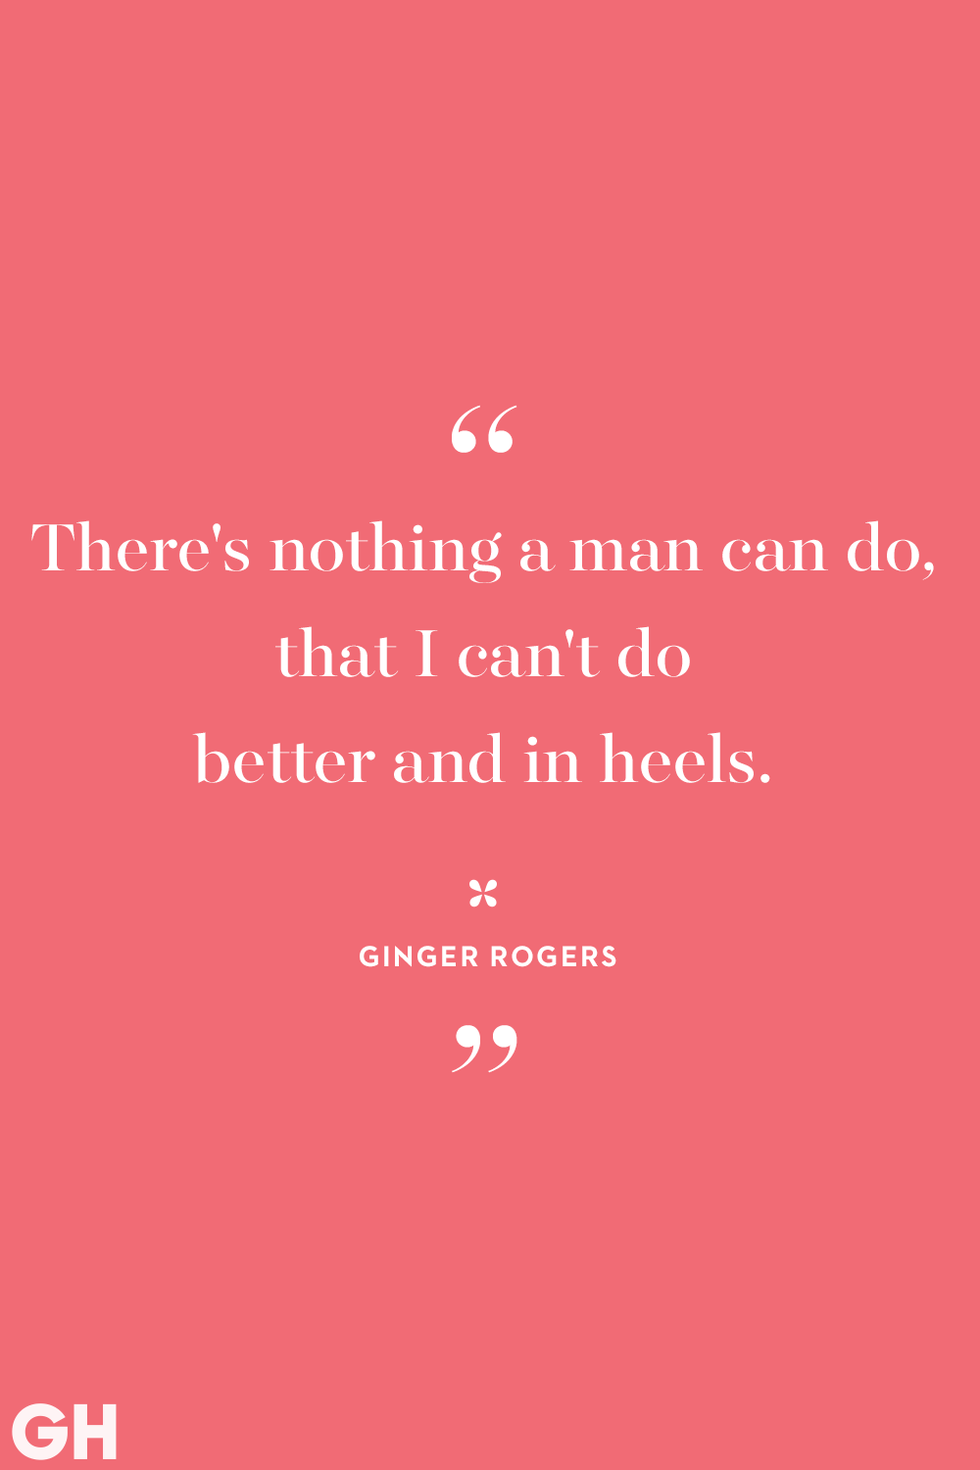 ginger rogers quote